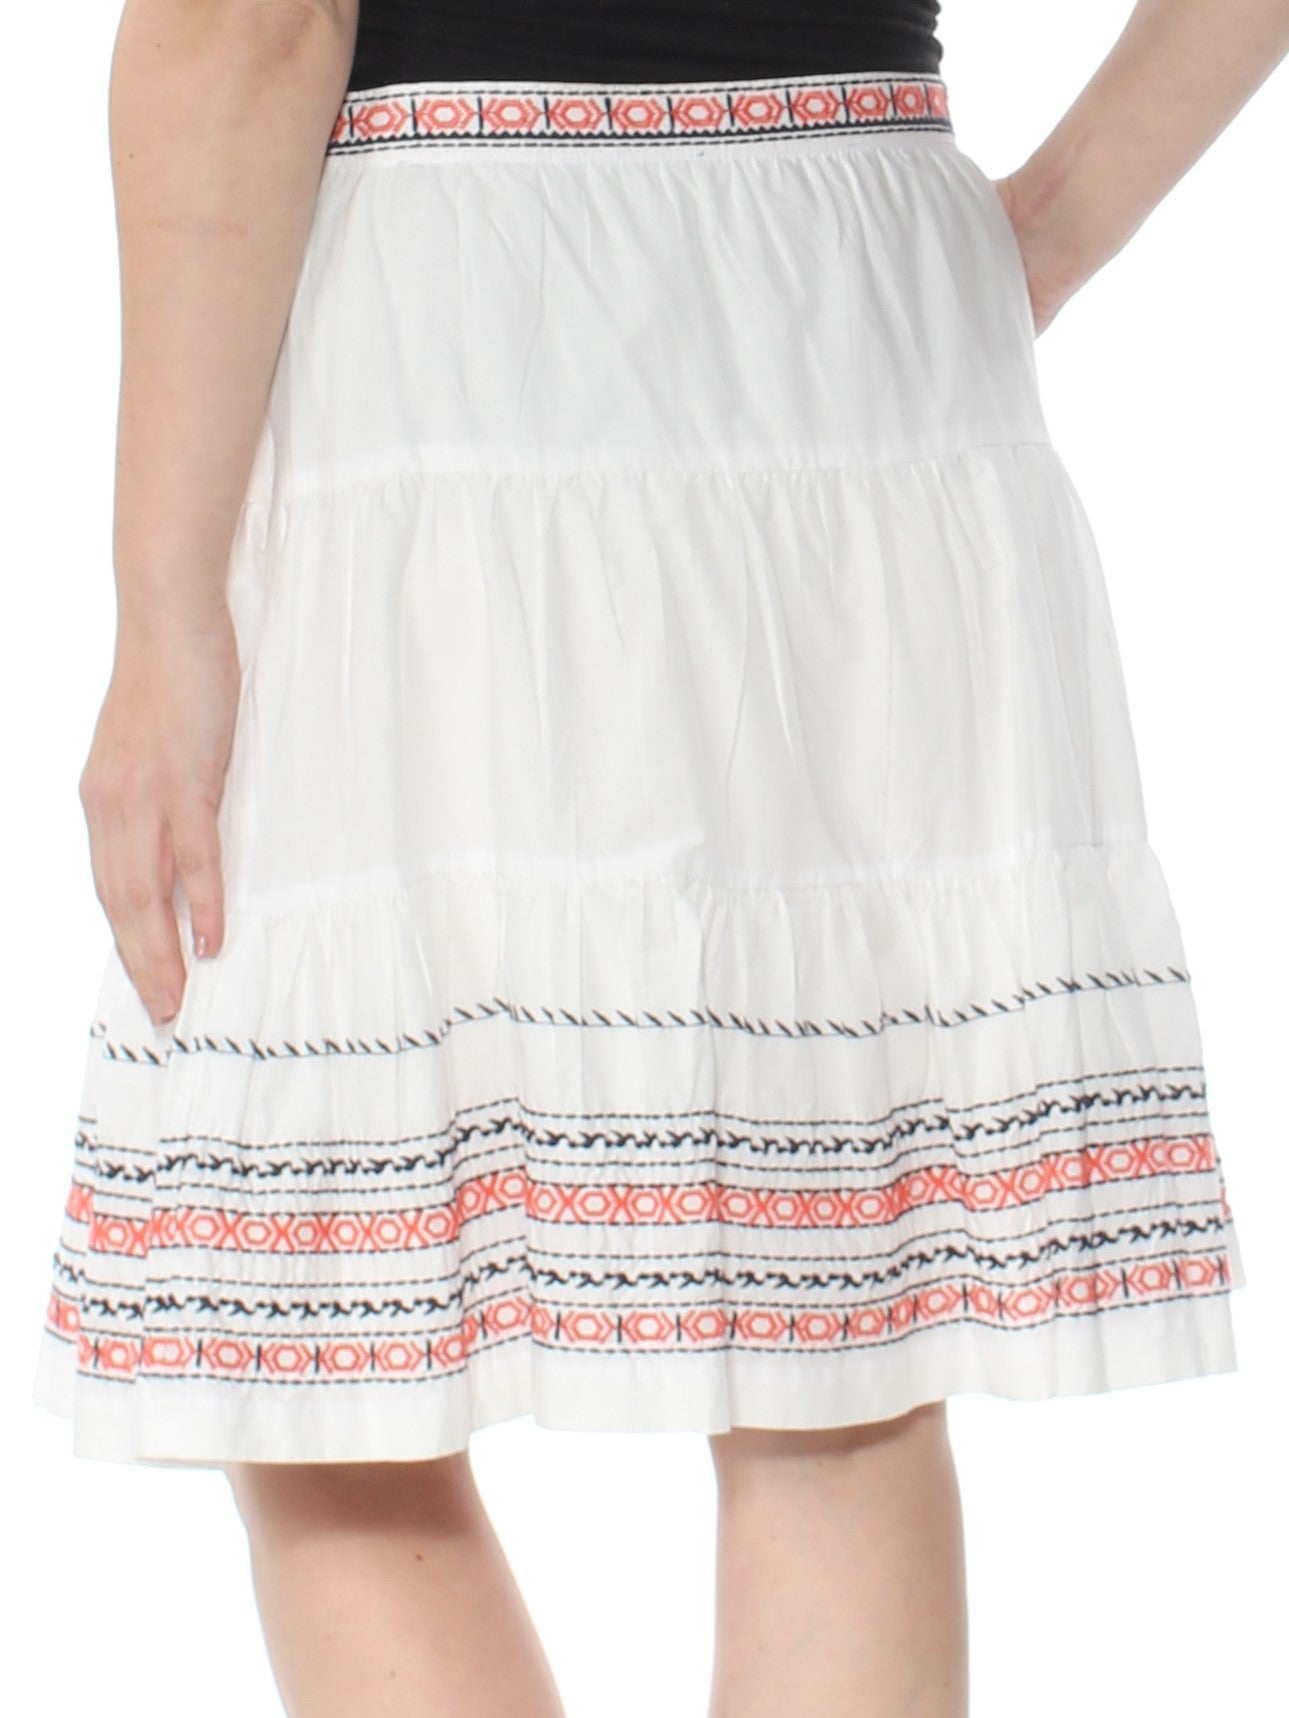 TOMMY HILFIGER Womens White Embroidered Knee Length Skirt